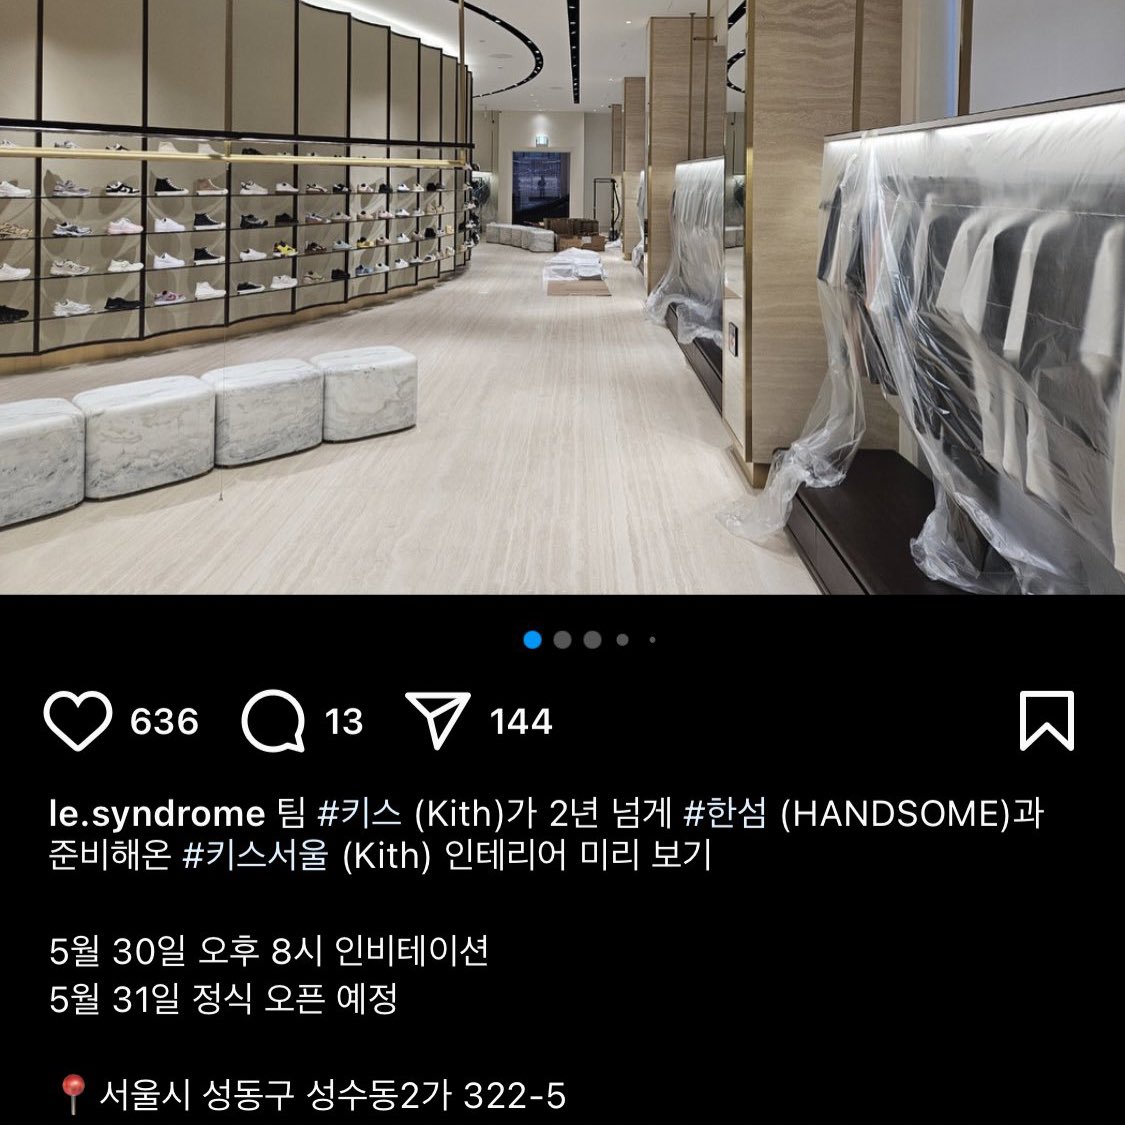 KITH is opening a brand new flagship store in Seoul, lisa could probably attend the opening inauguration since they currently have a collaboration going on 👀 The opening is scheduled for May 30th at 5 PM 🇰🇷